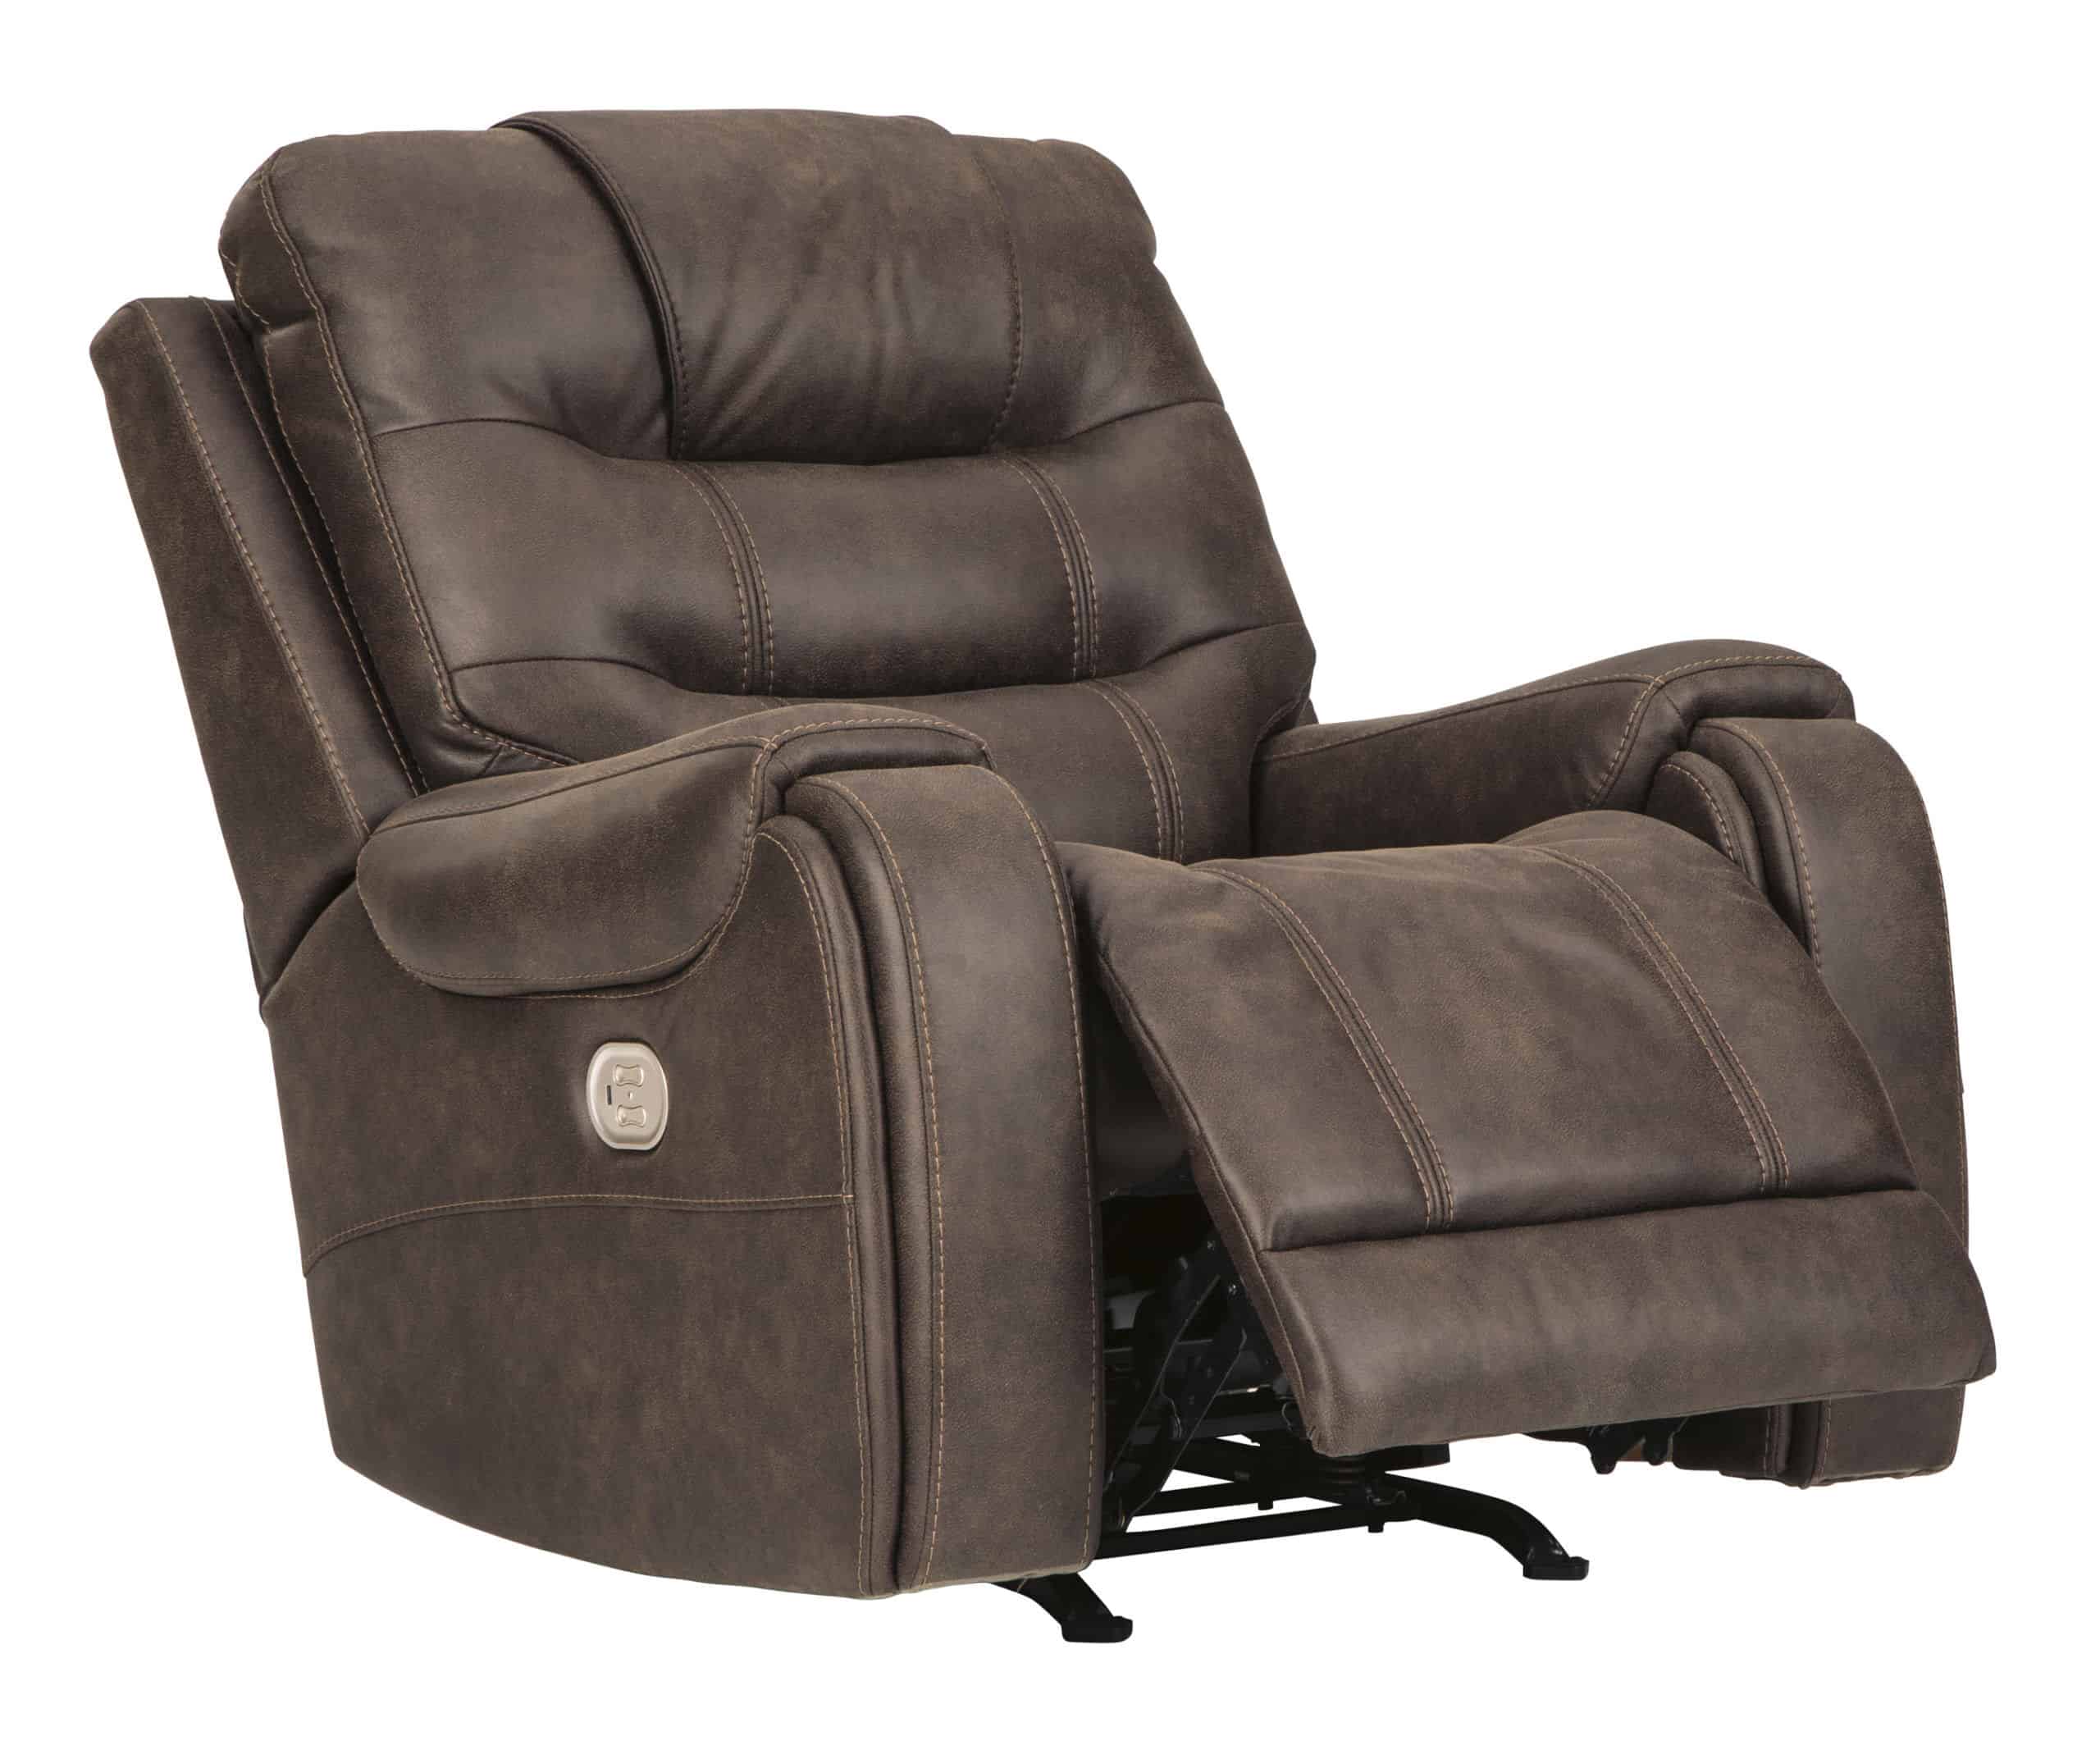 Yacolt Power Recliner Sofa & Loveseat features authentic weathered affect brown microfiber.